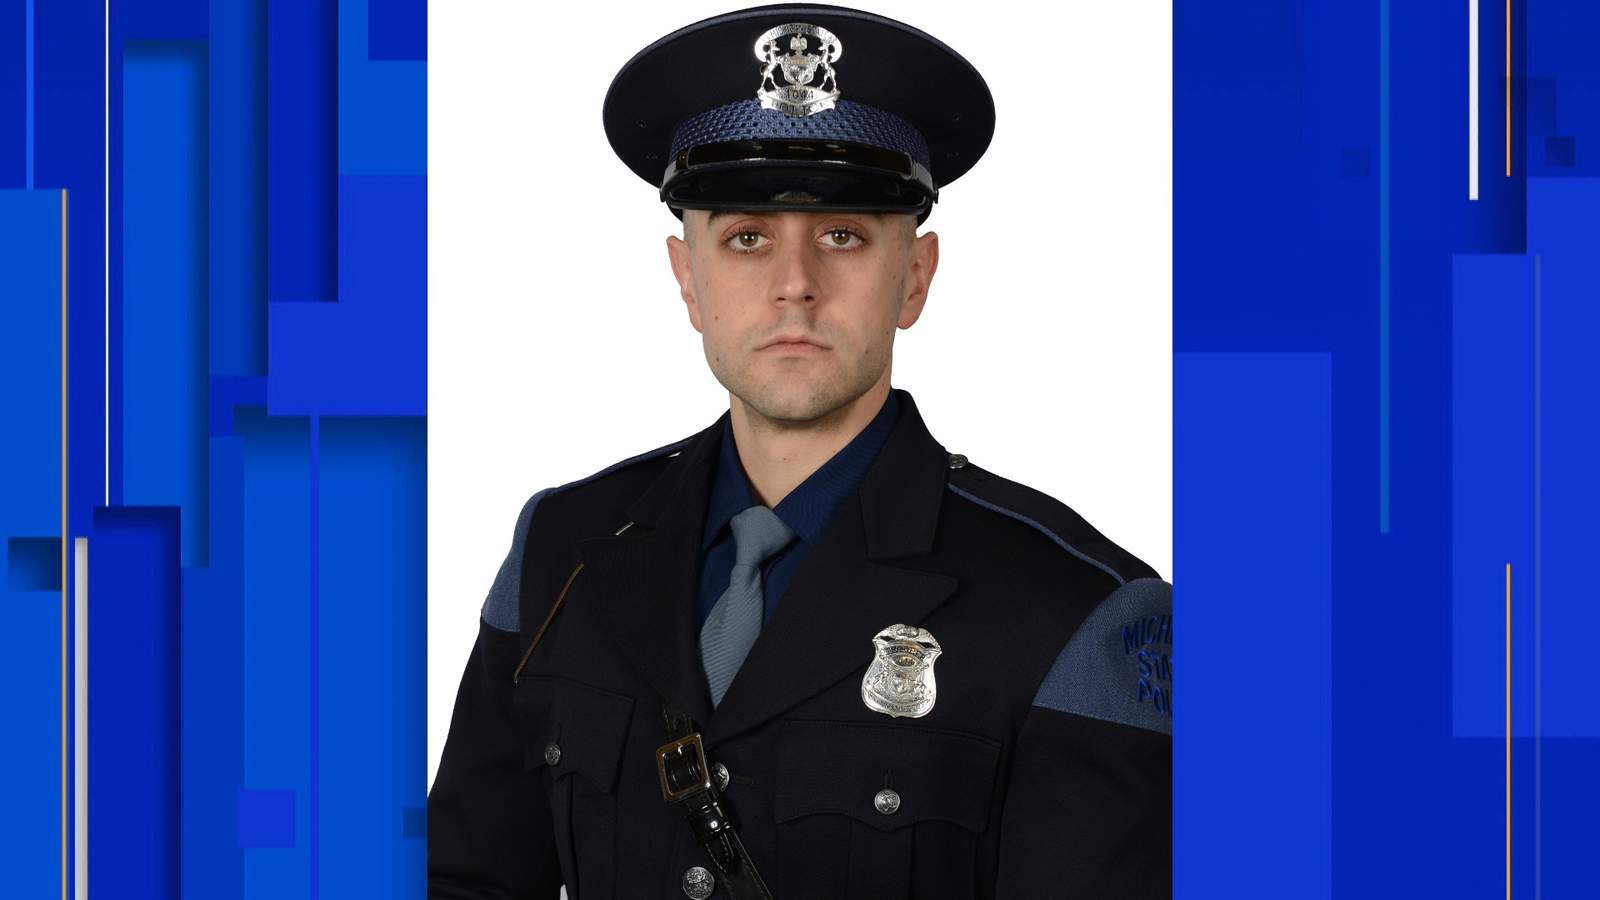 Michigan State Police trooper dies after being struck by suspected drunk driver